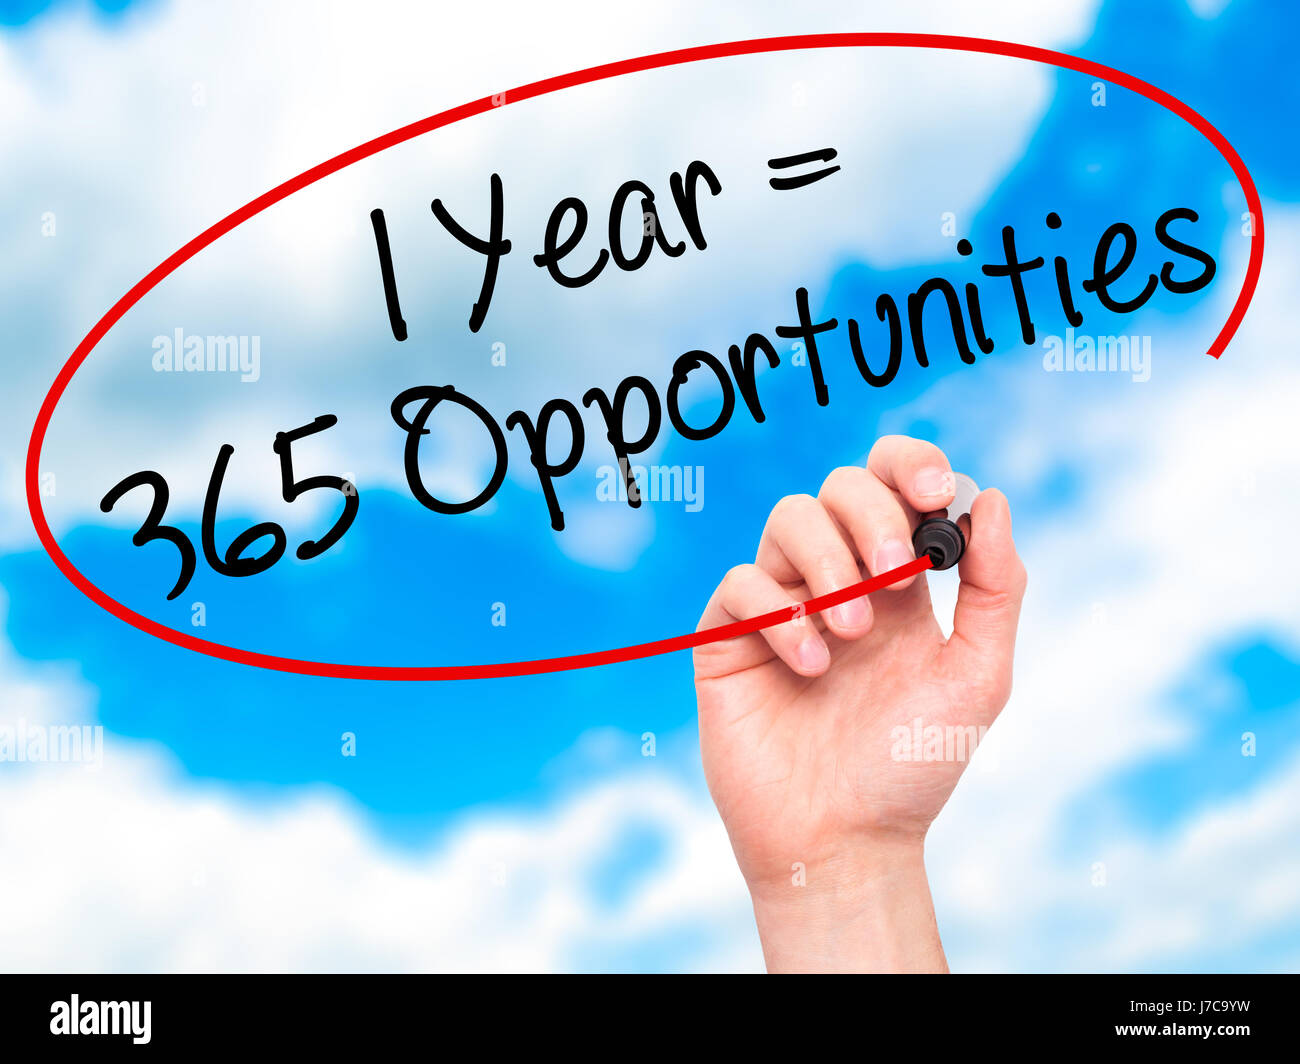 Man Hand Writing 1 Year 365 Opportunities With Black Marker On Visual Screen Isolated On Background Business Technology Internet Concept Stock Stock Photo Alamy